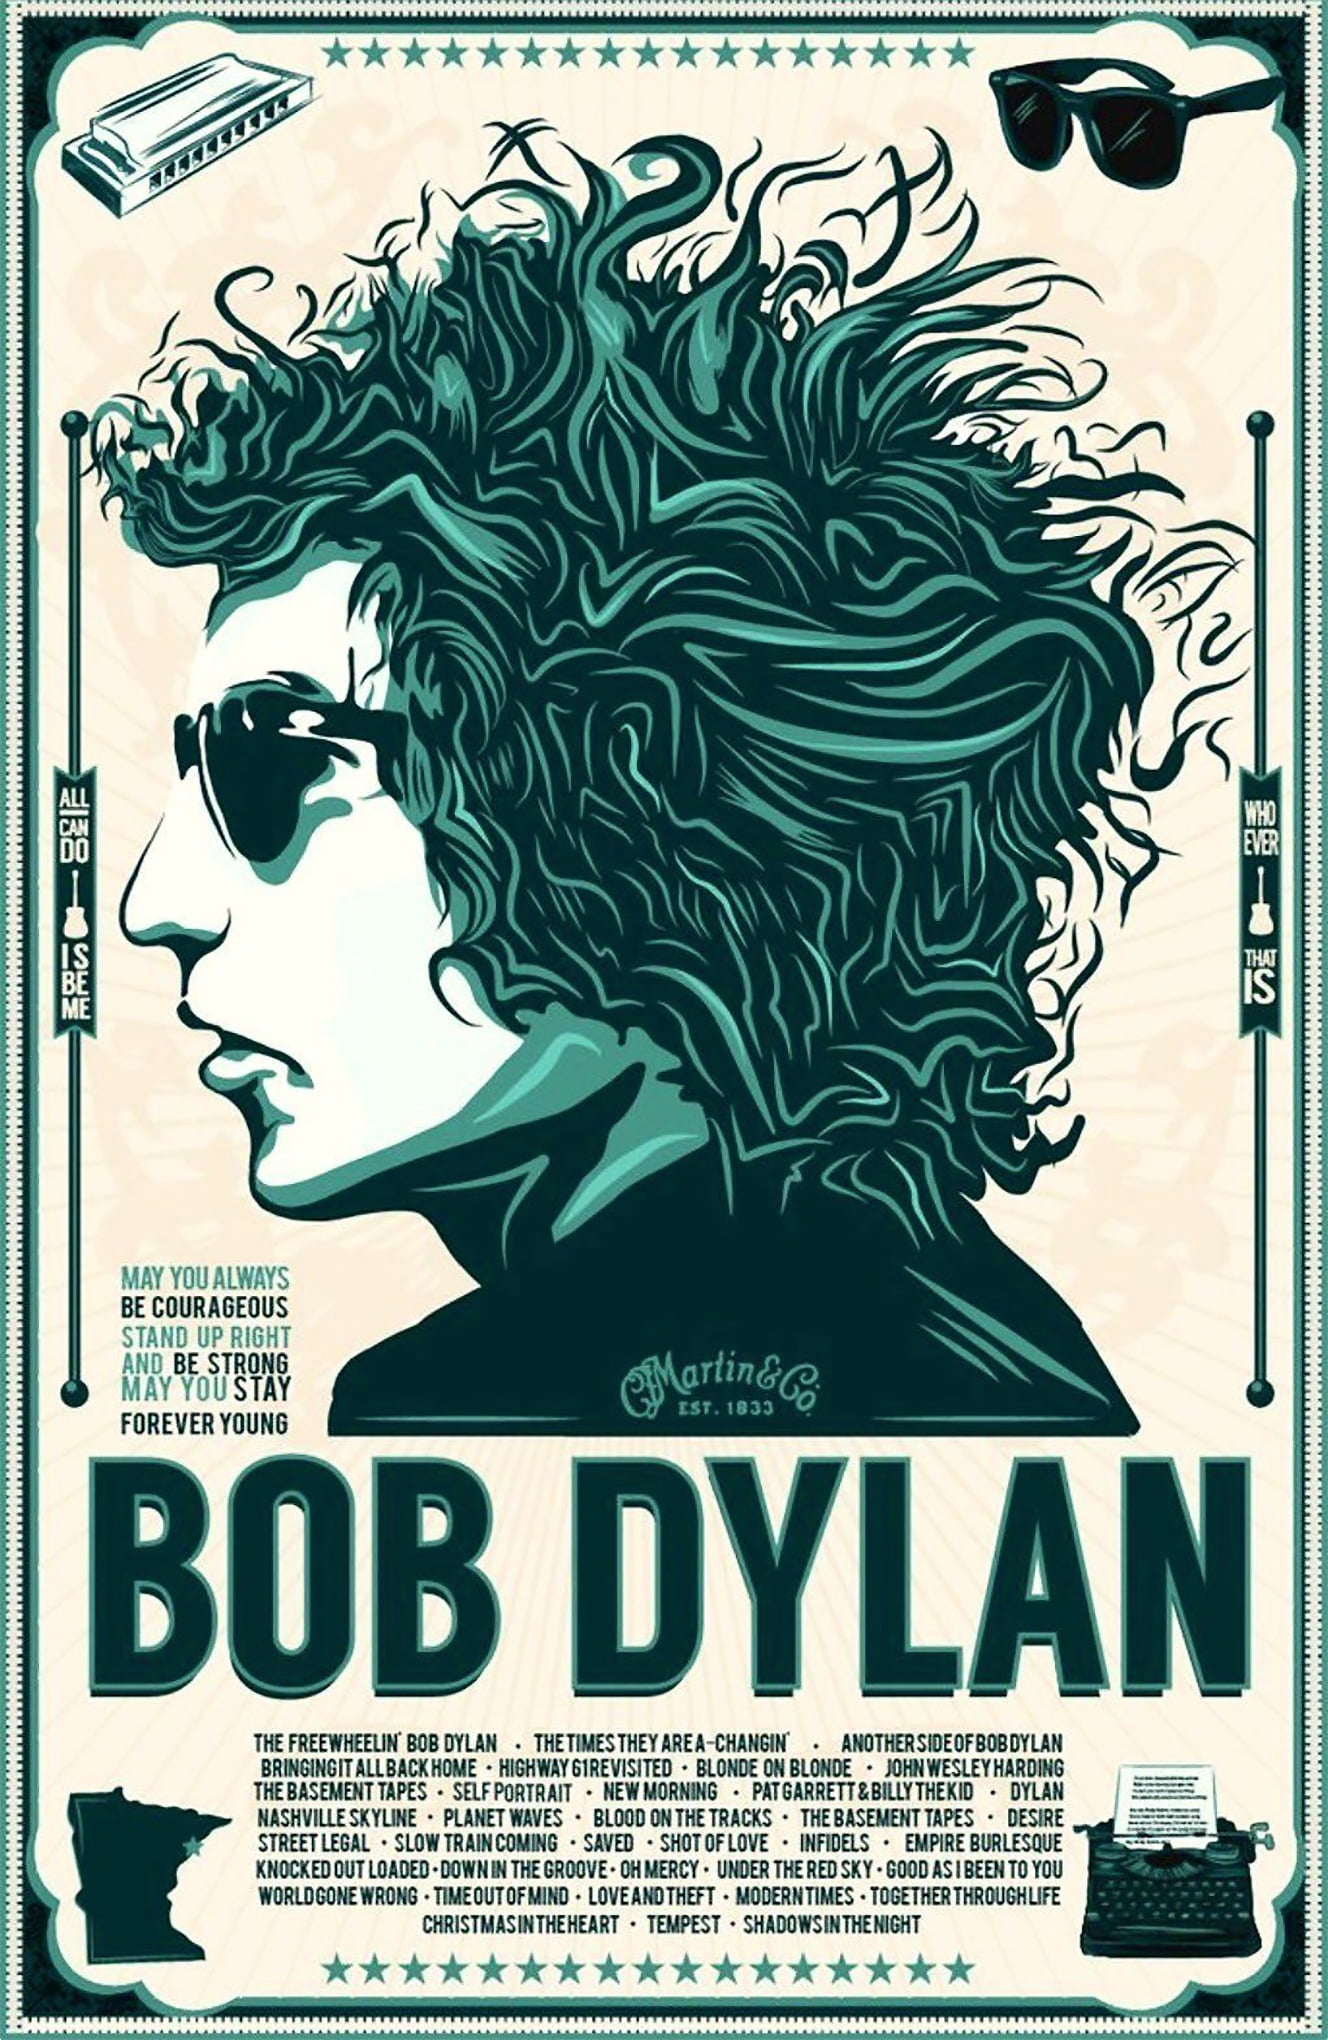 Bob Dylan 24x36 inch rolled wall poster 